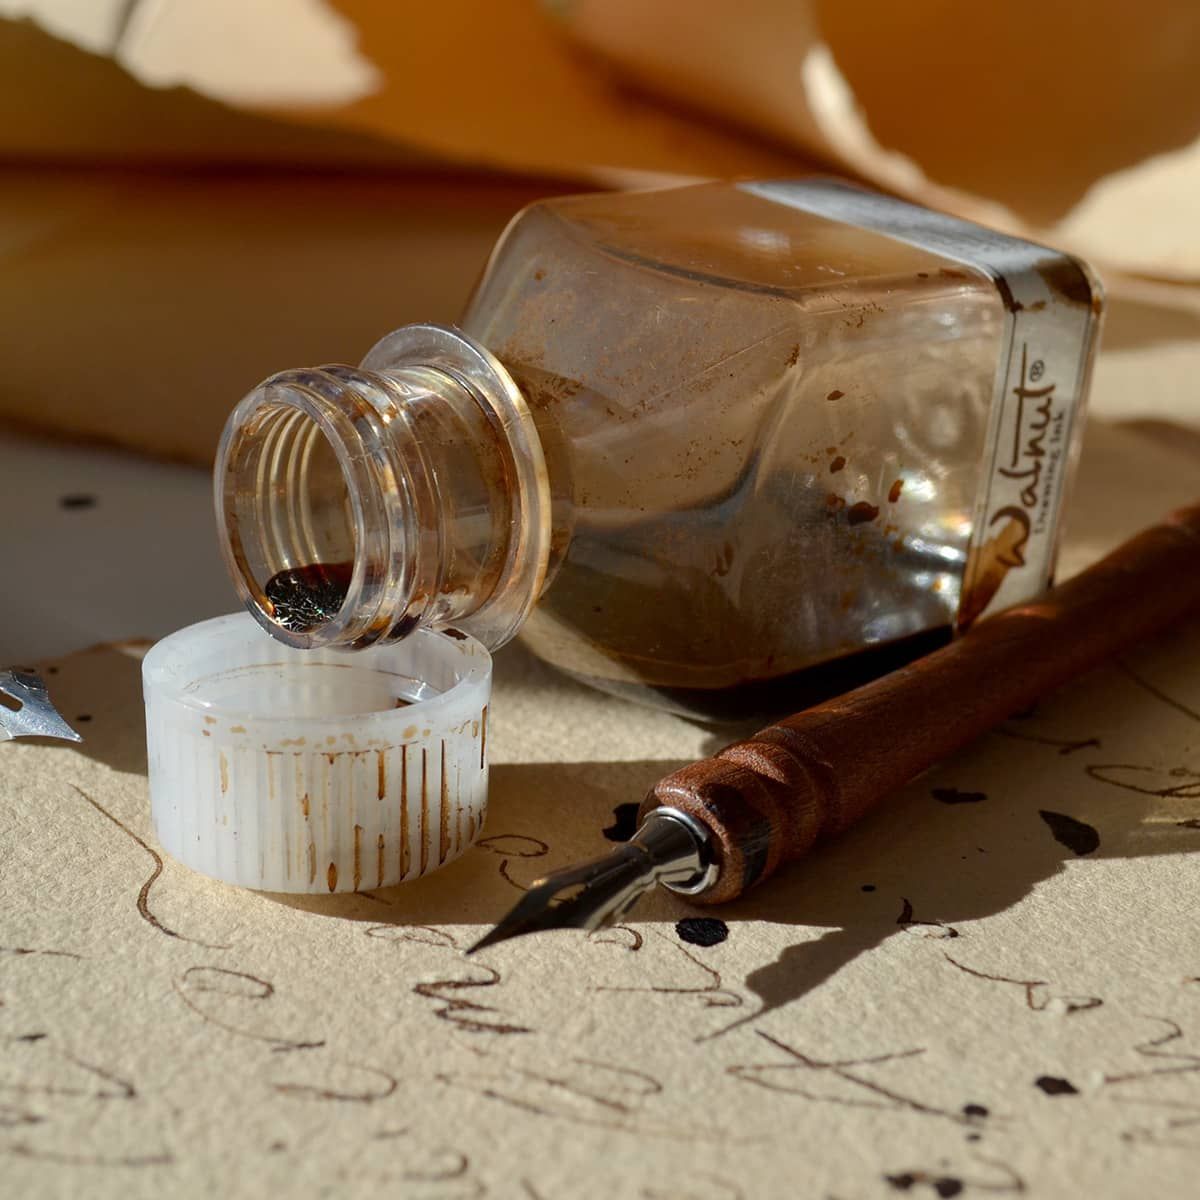 Rembrandt and DaVinci used walnut ink in their drawings - now you can too!